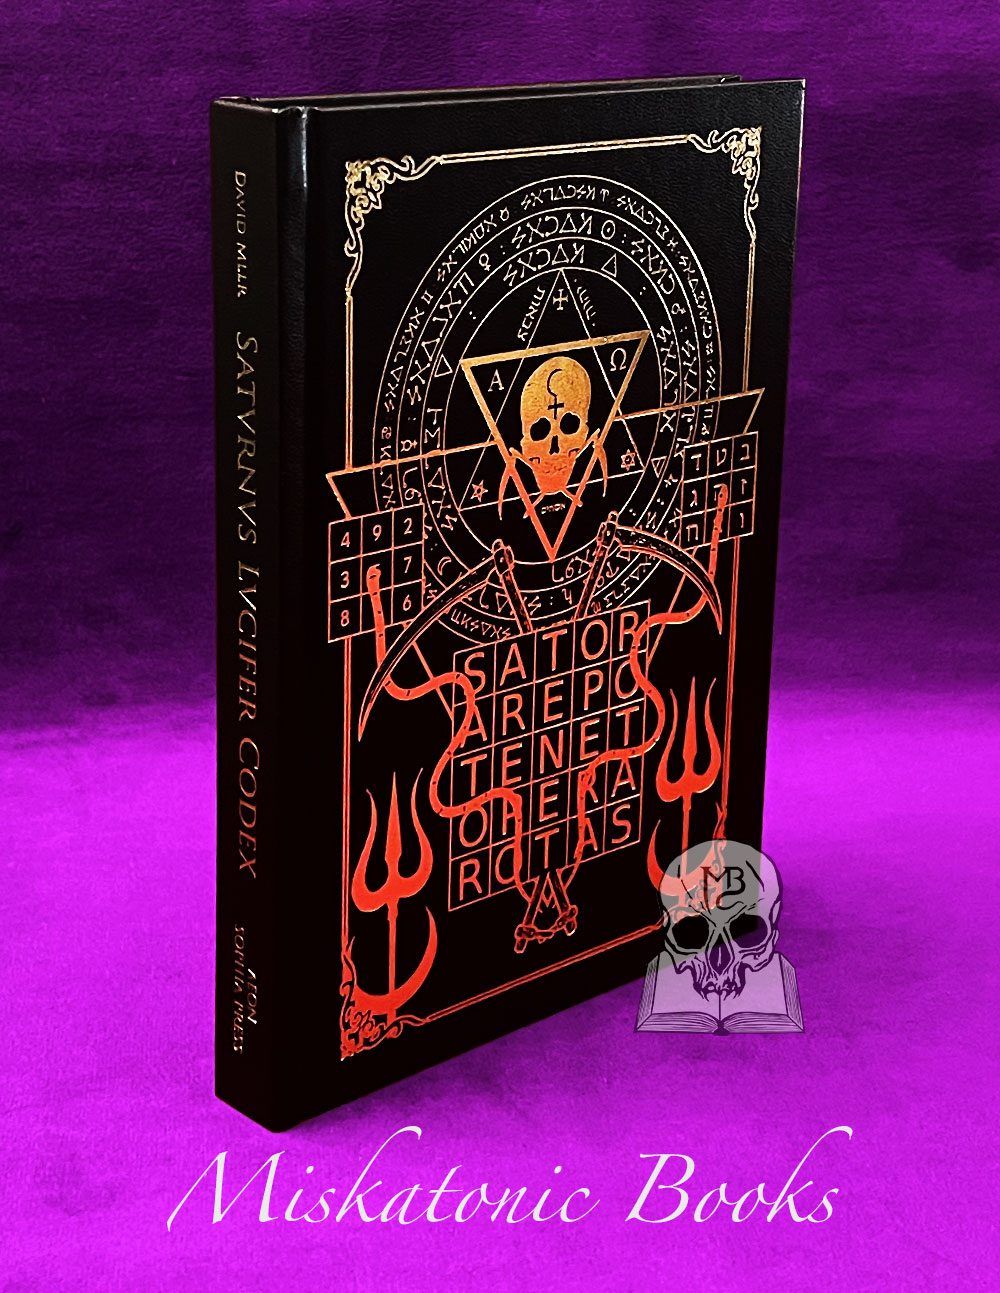 SATVRNVS LVCIFER CODEX by David Mllr - Deluxe Leather Bound Limited Edition Hardcover